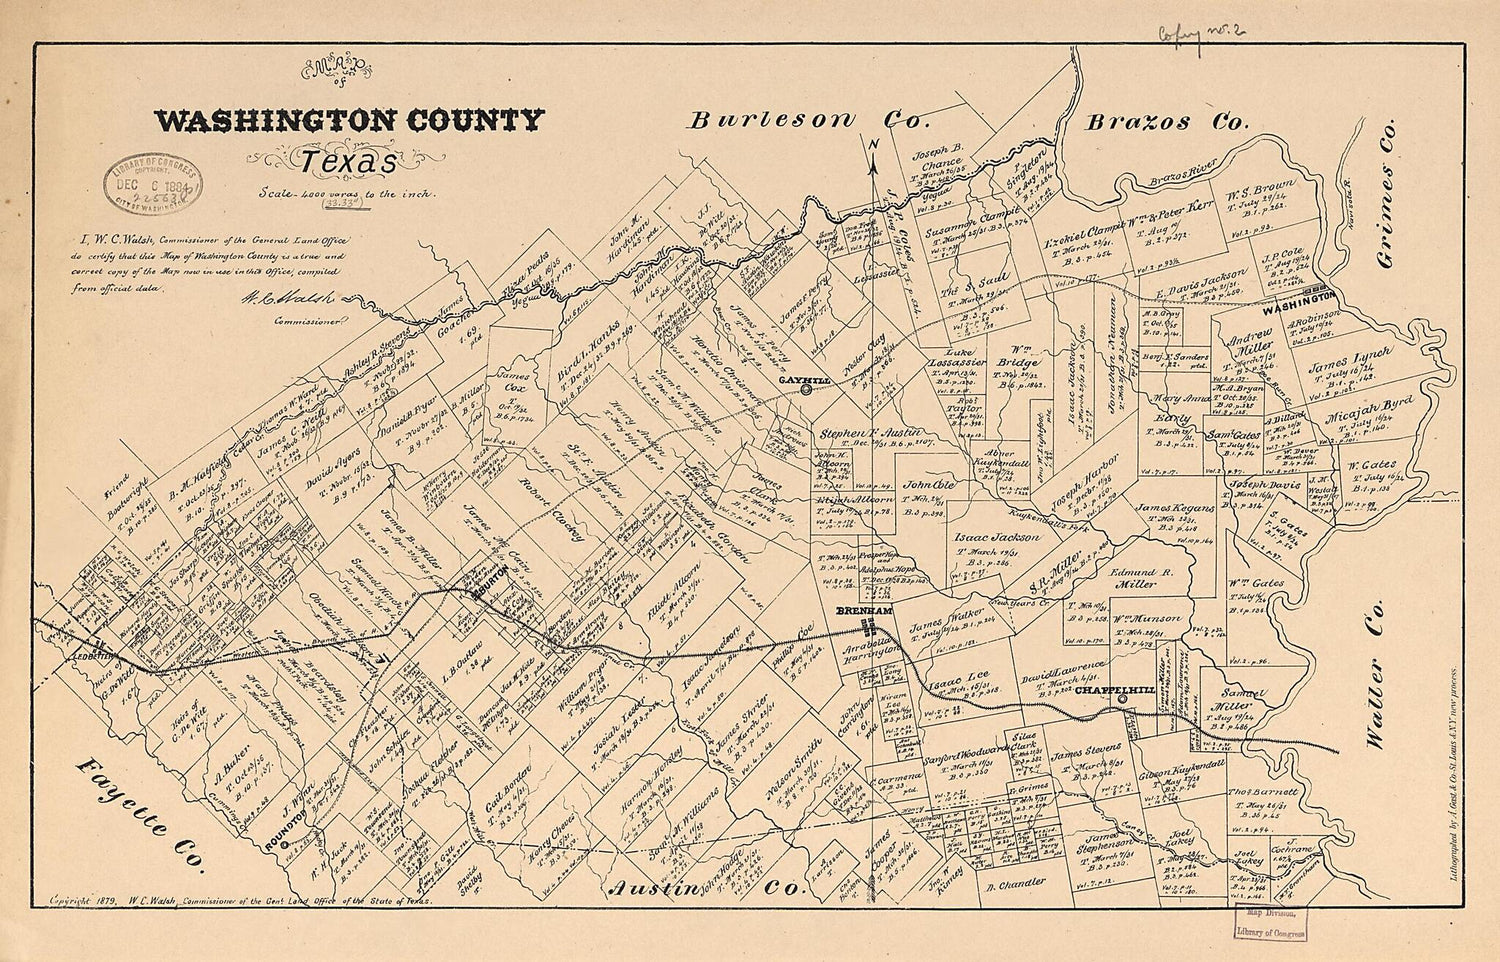 This old map of Map of Washington County, Texas from 1879 was created by  August Gast &amp; Co,  Texas. General Land Office, W. C. (William C.) Walsh in 1879